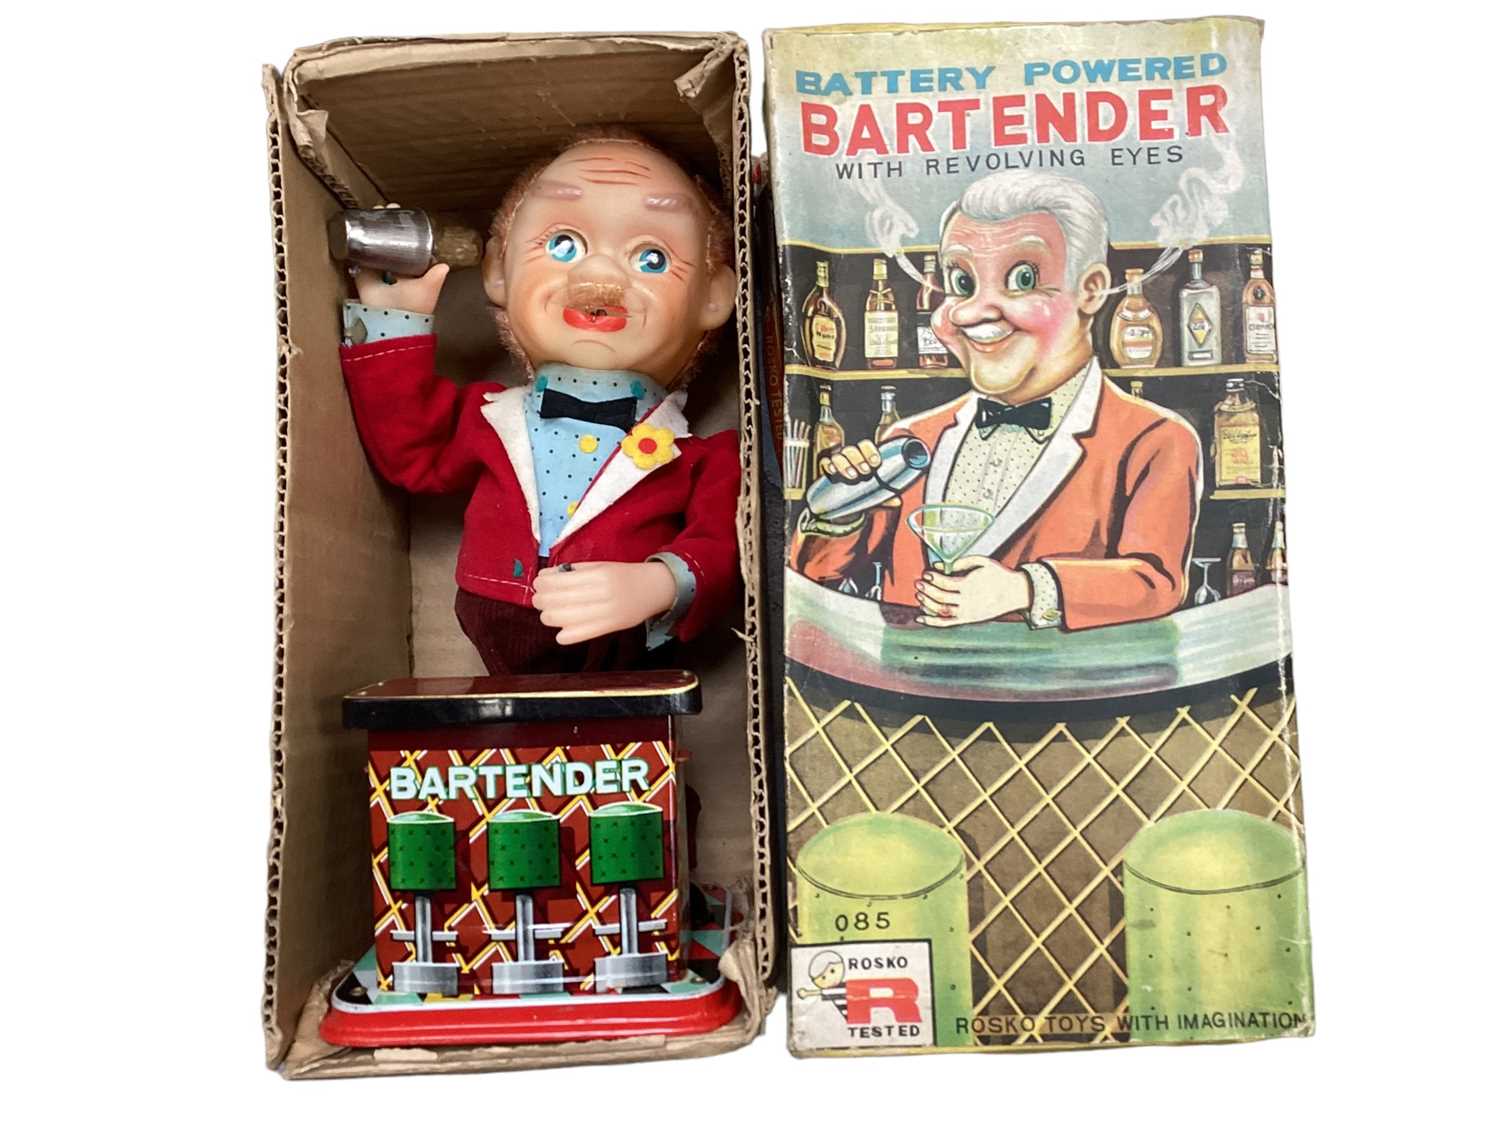 Rosko Battery operated Bartender with revolving eyes, in original box, plus a Cragstan Crapshooter b